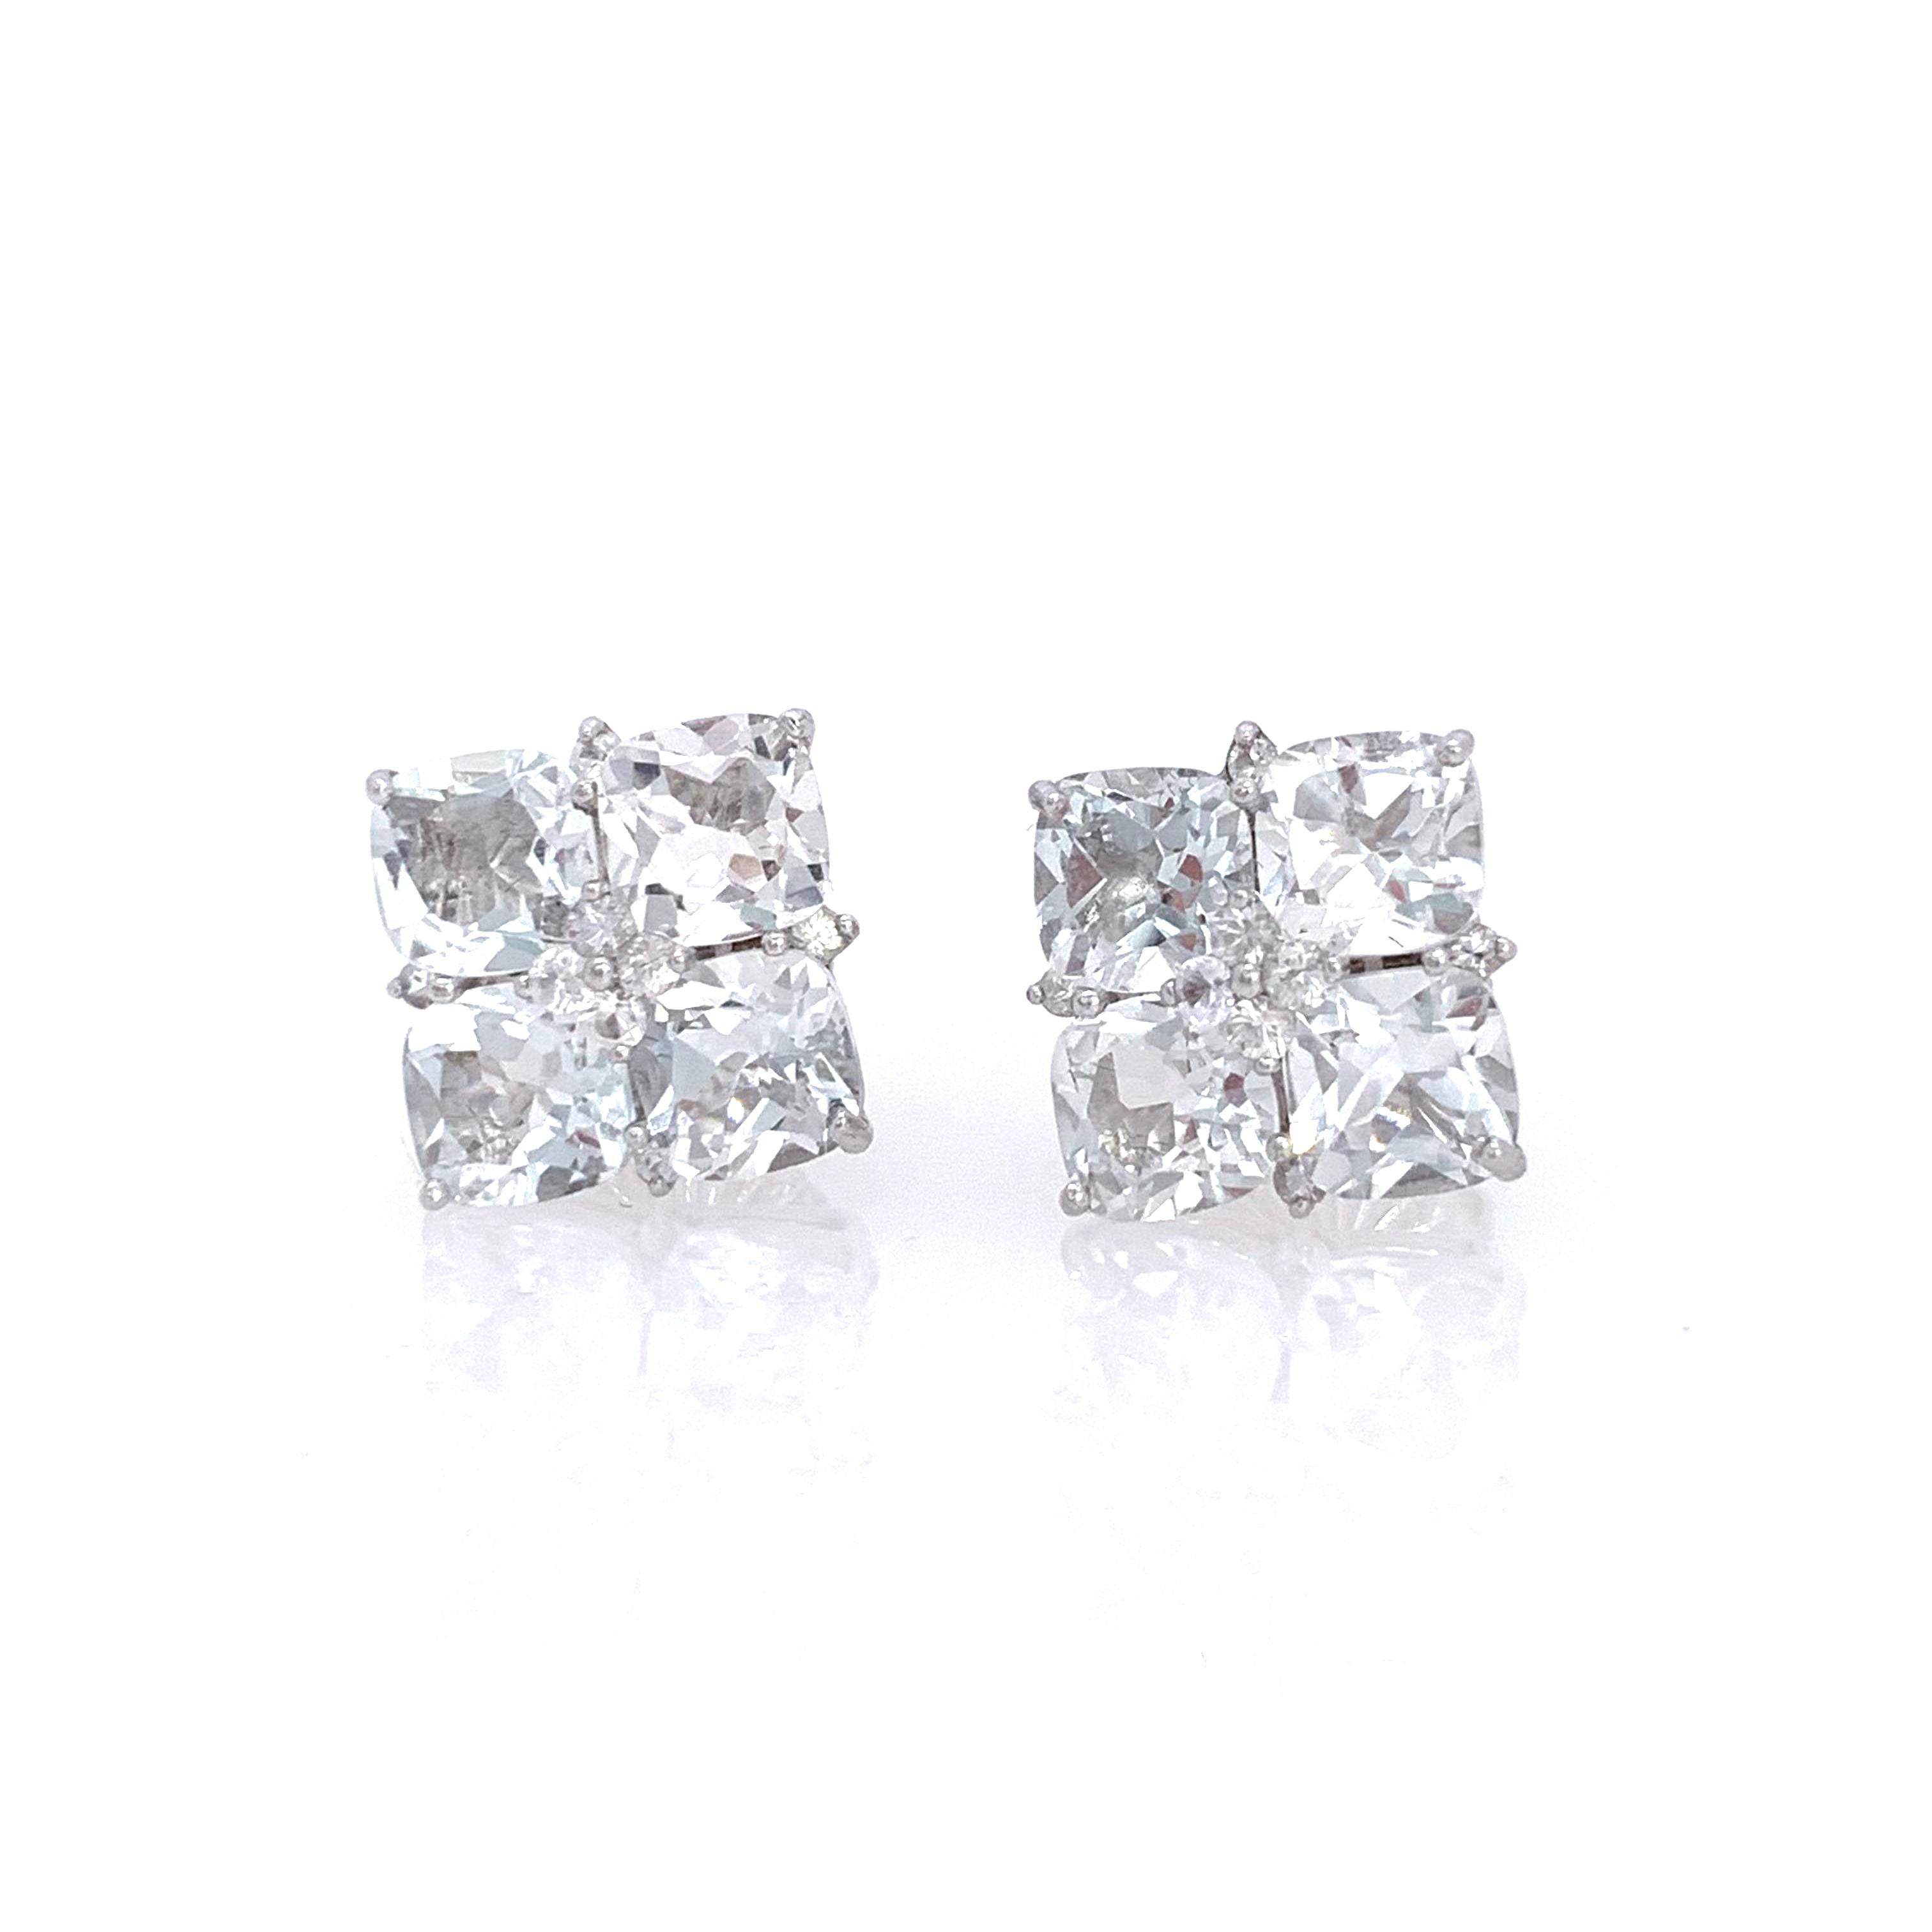 Stunning Bijoux Num Quad Cushion-cut White Topaz Square Earrings

The earrings feature flawless AAA quality cushion-cut white topaz, adorned with small round white sapphire, handset in platinum plated sterling silver. Straight post with large